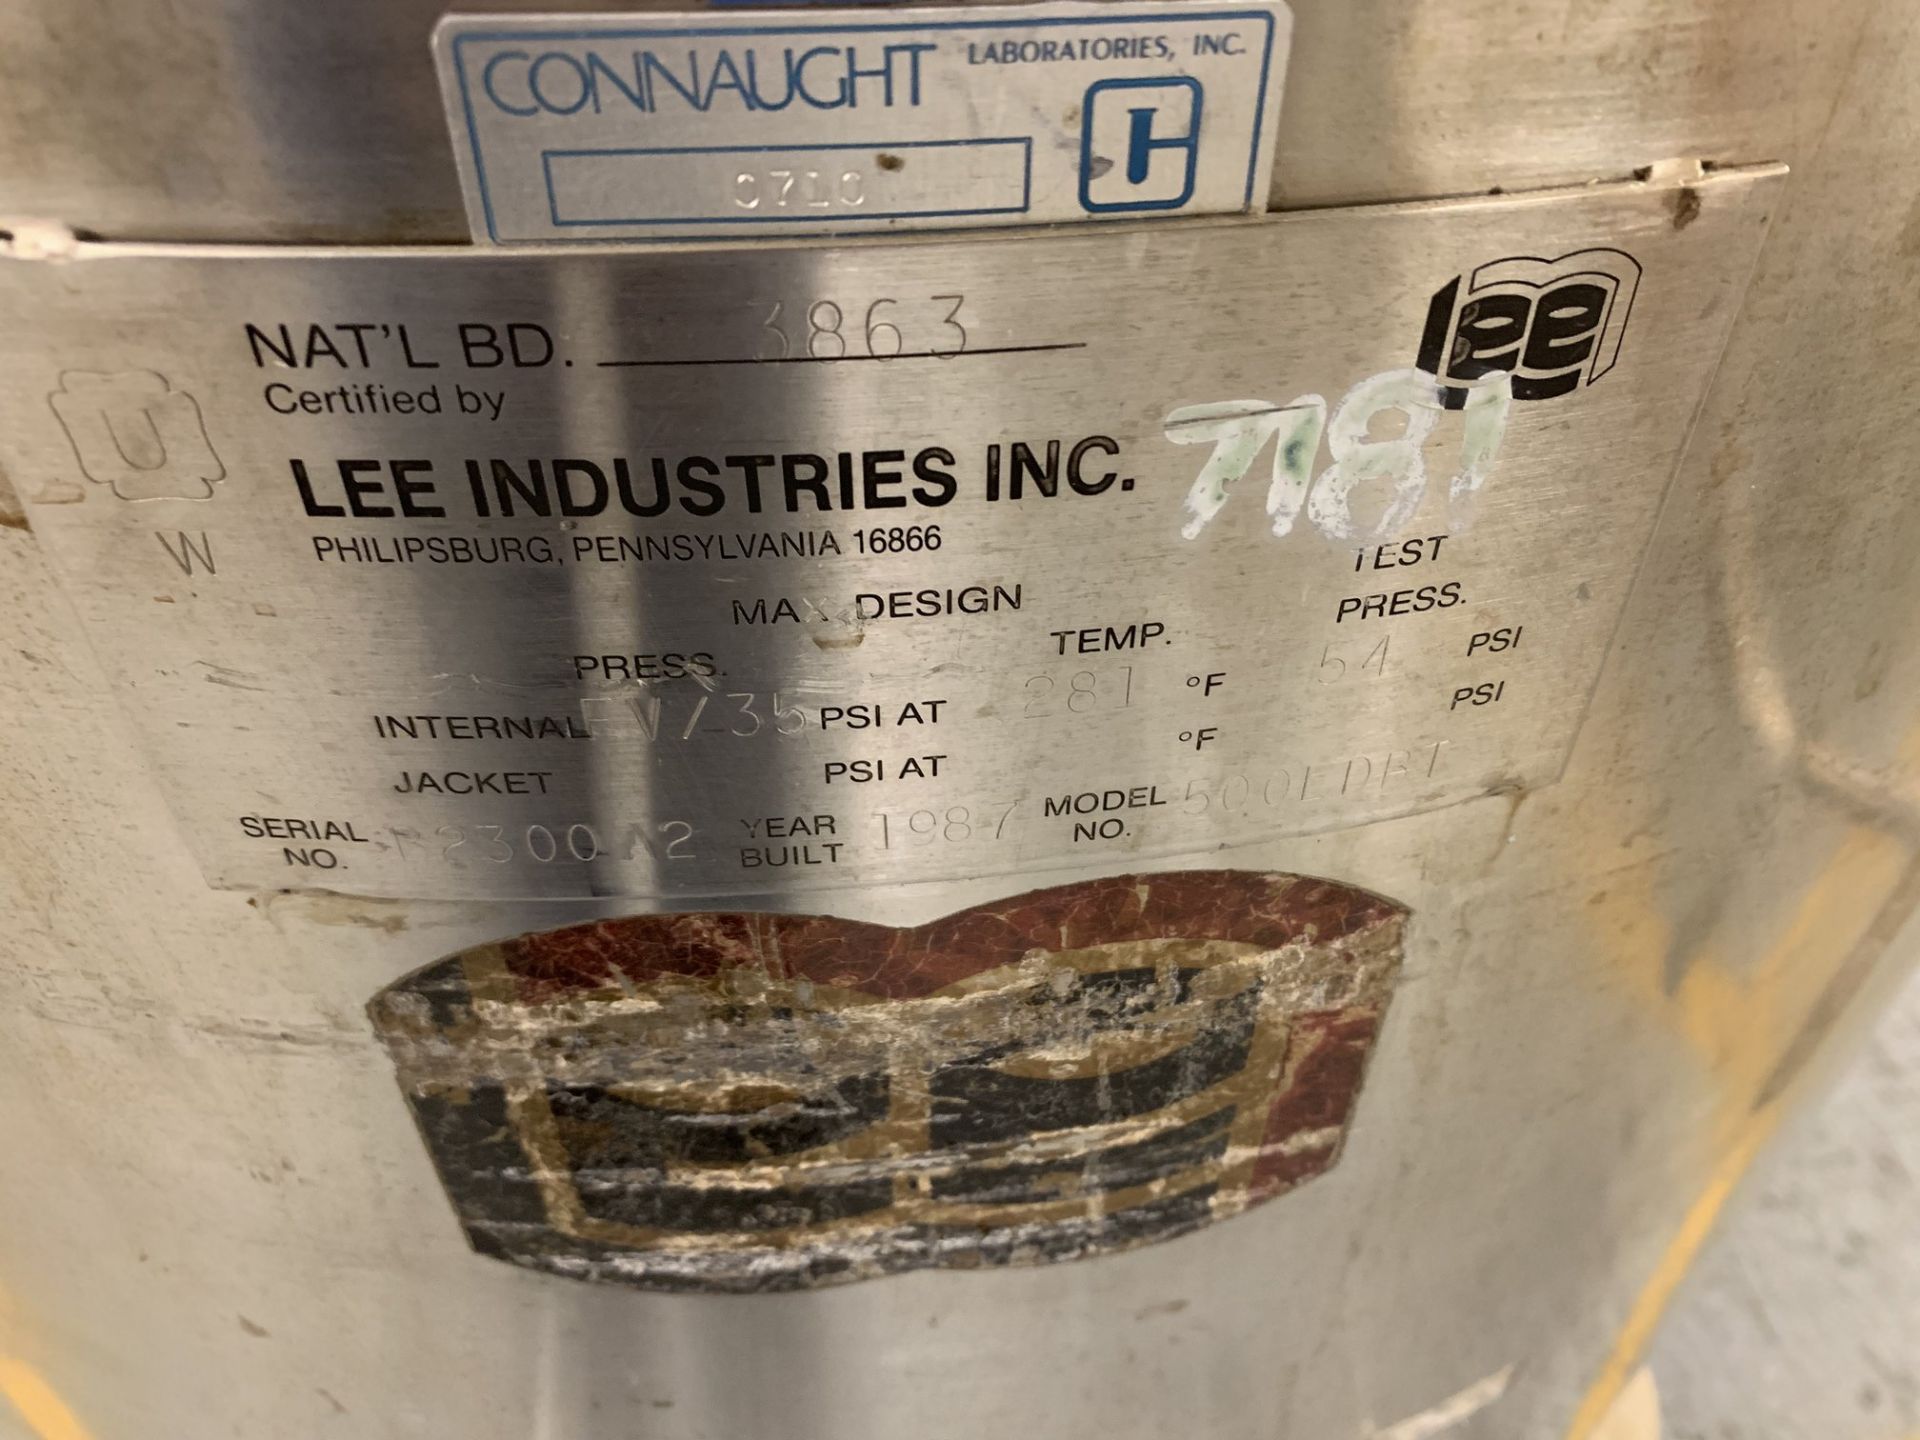 Lot # 53 - Lee 500LDBT 500 Liter Stainless Steel Pressure Vessel, Propellor agitator without - Image 3 of 3